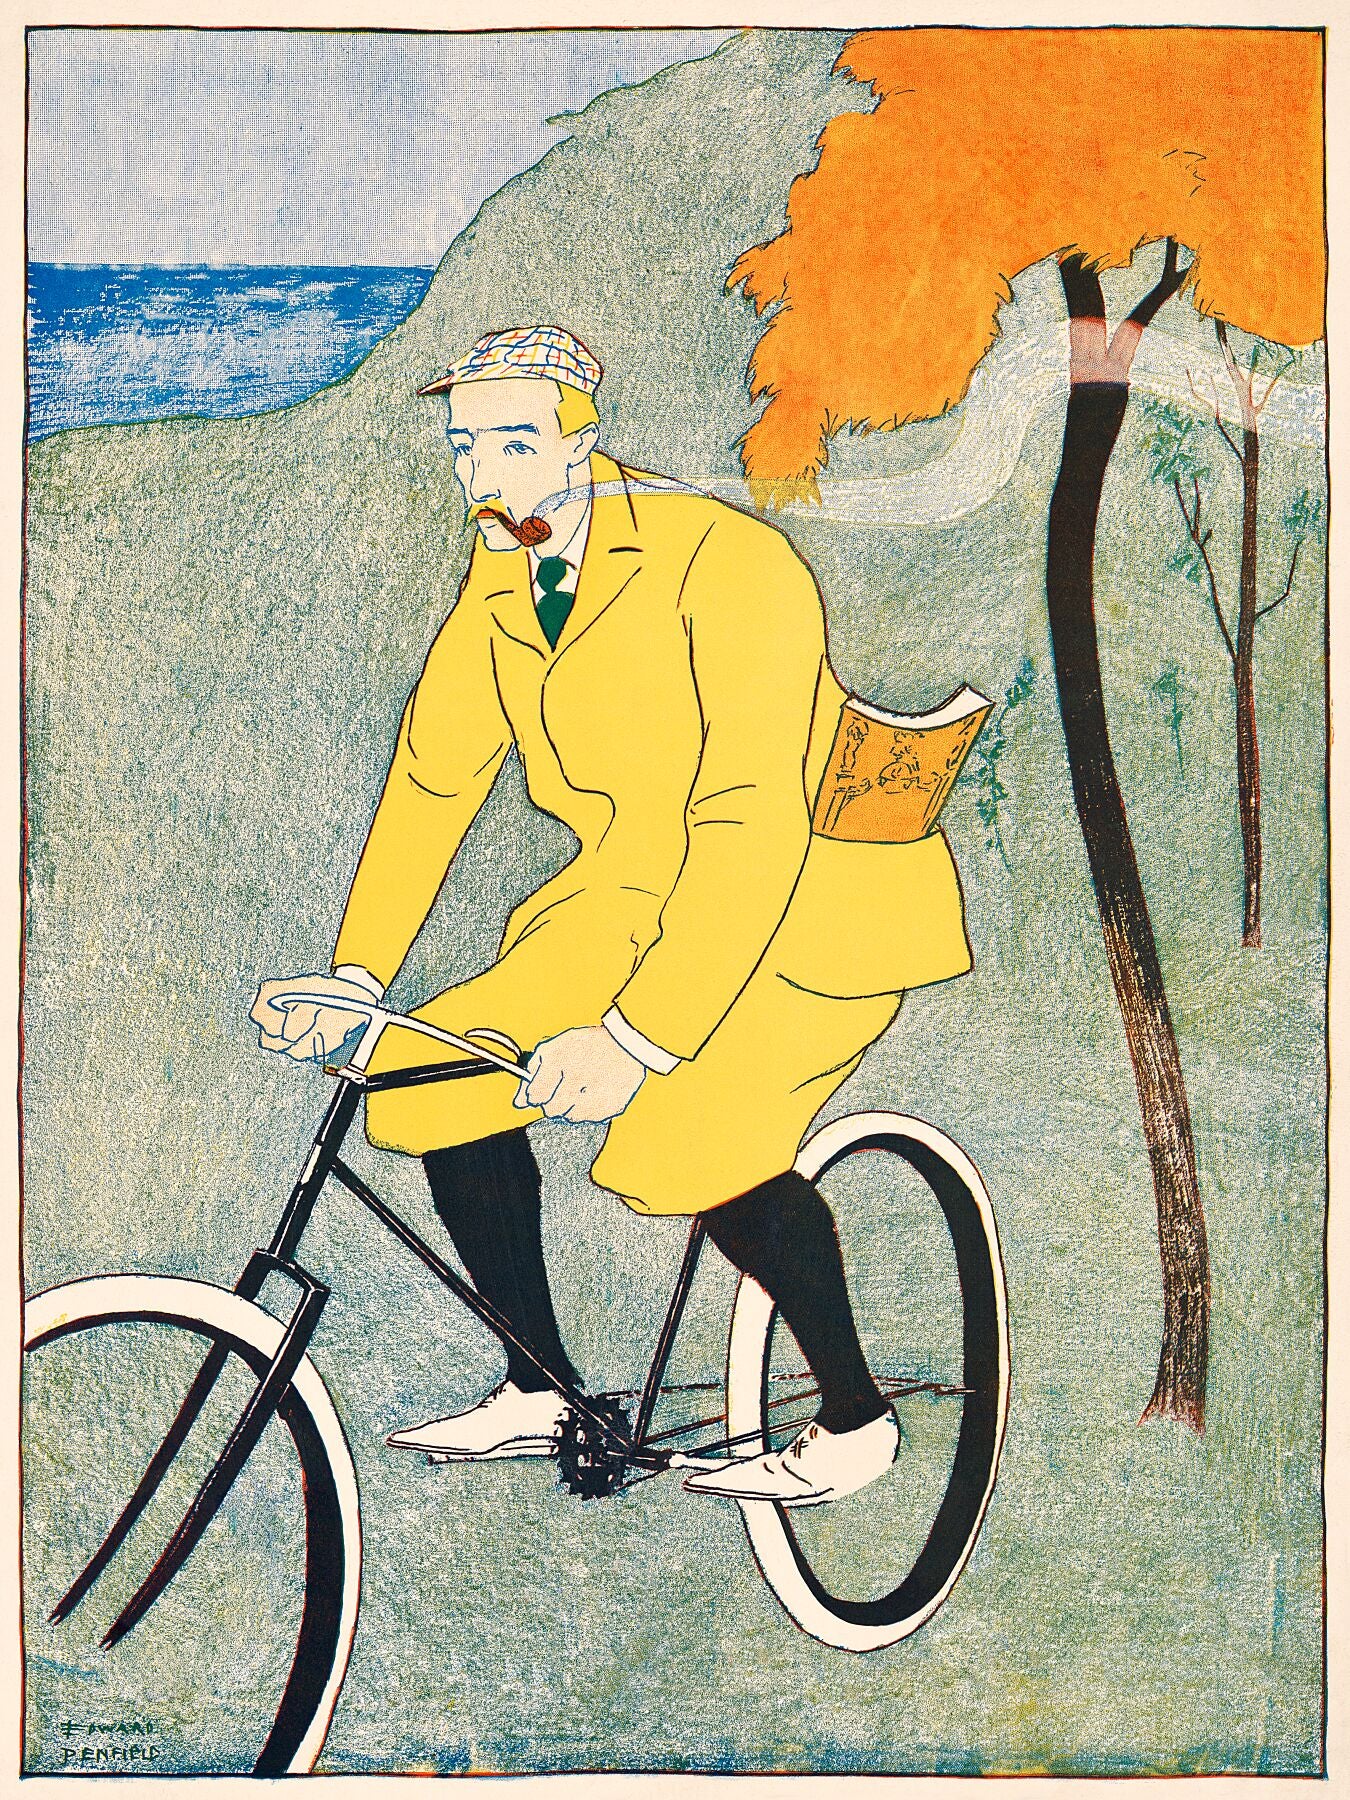 Man riding bicycle by Edward Penfield - 1894